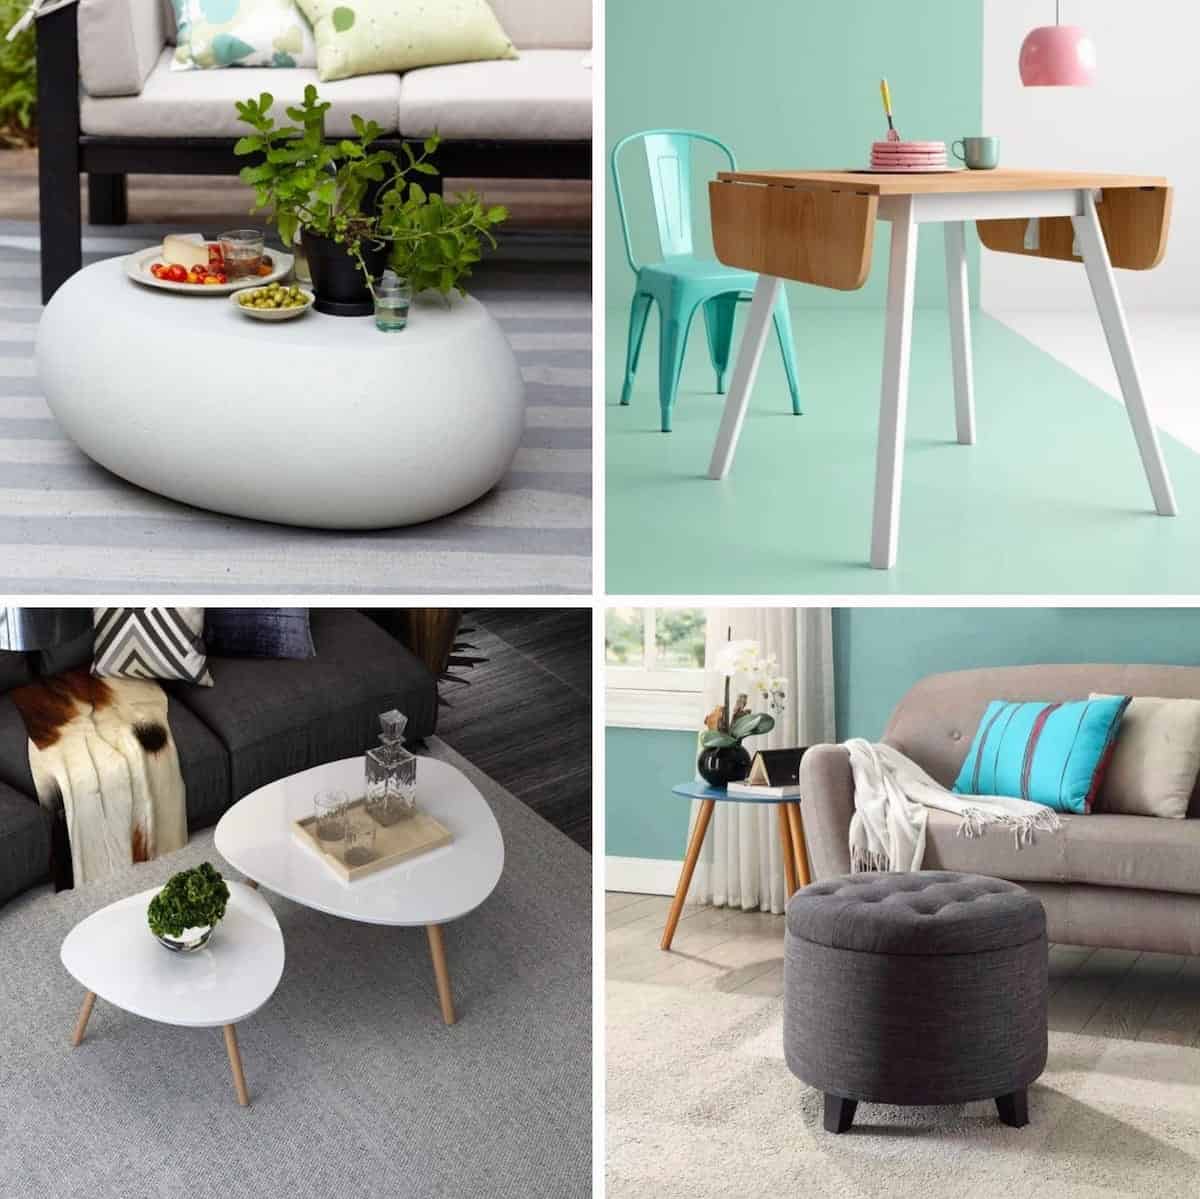 Interior Design 2021: New Solutions, Inspirational Ideas, Style Trends